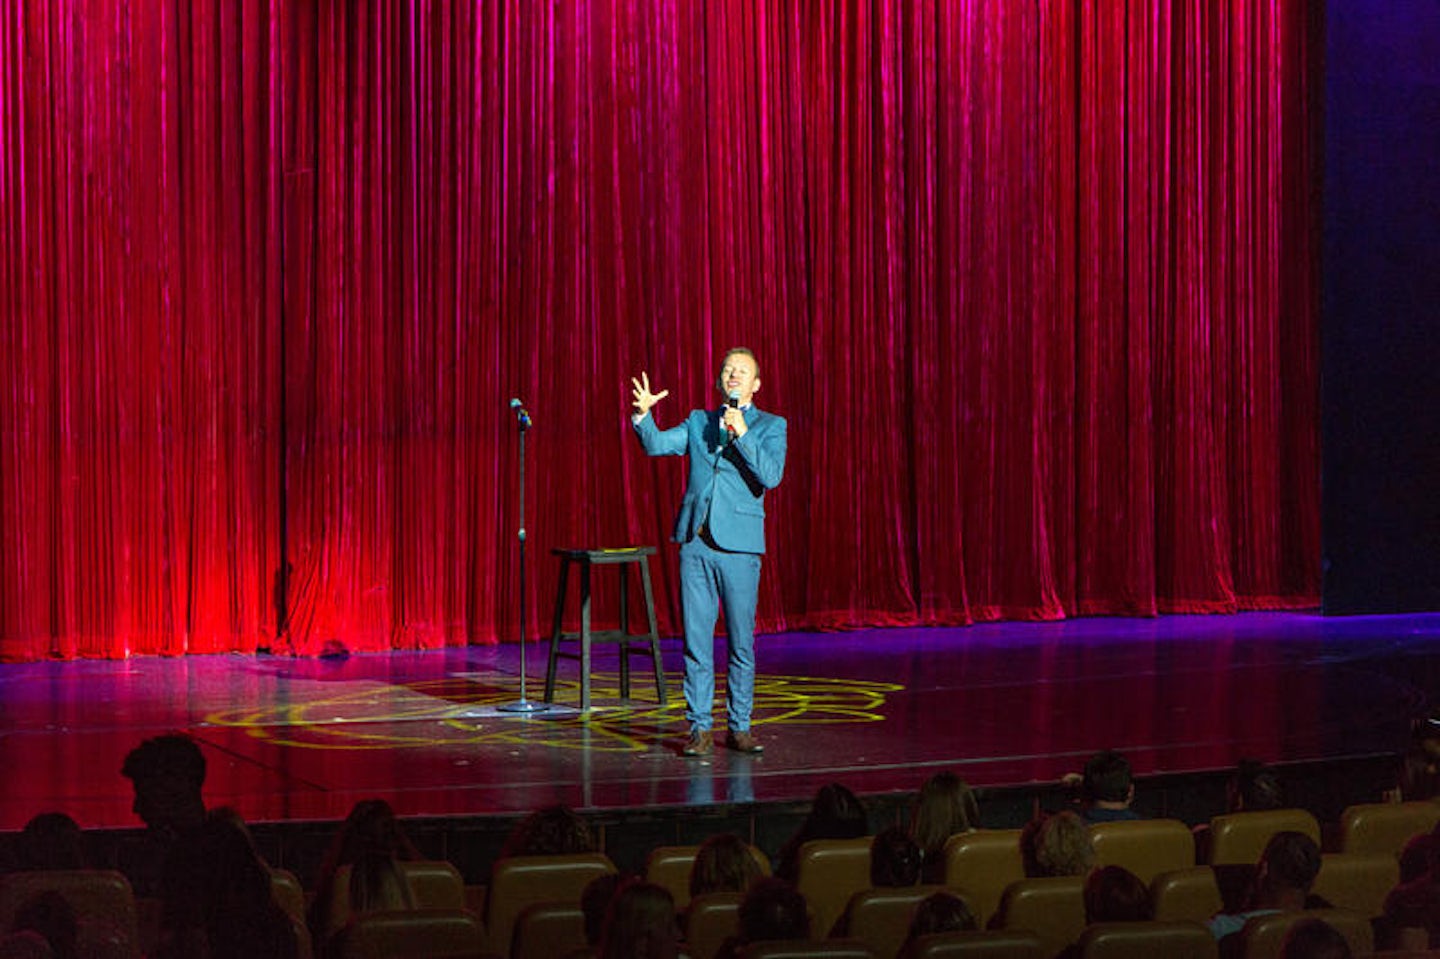 Comedy Show in the Royal Theater on Mariner of the Seas